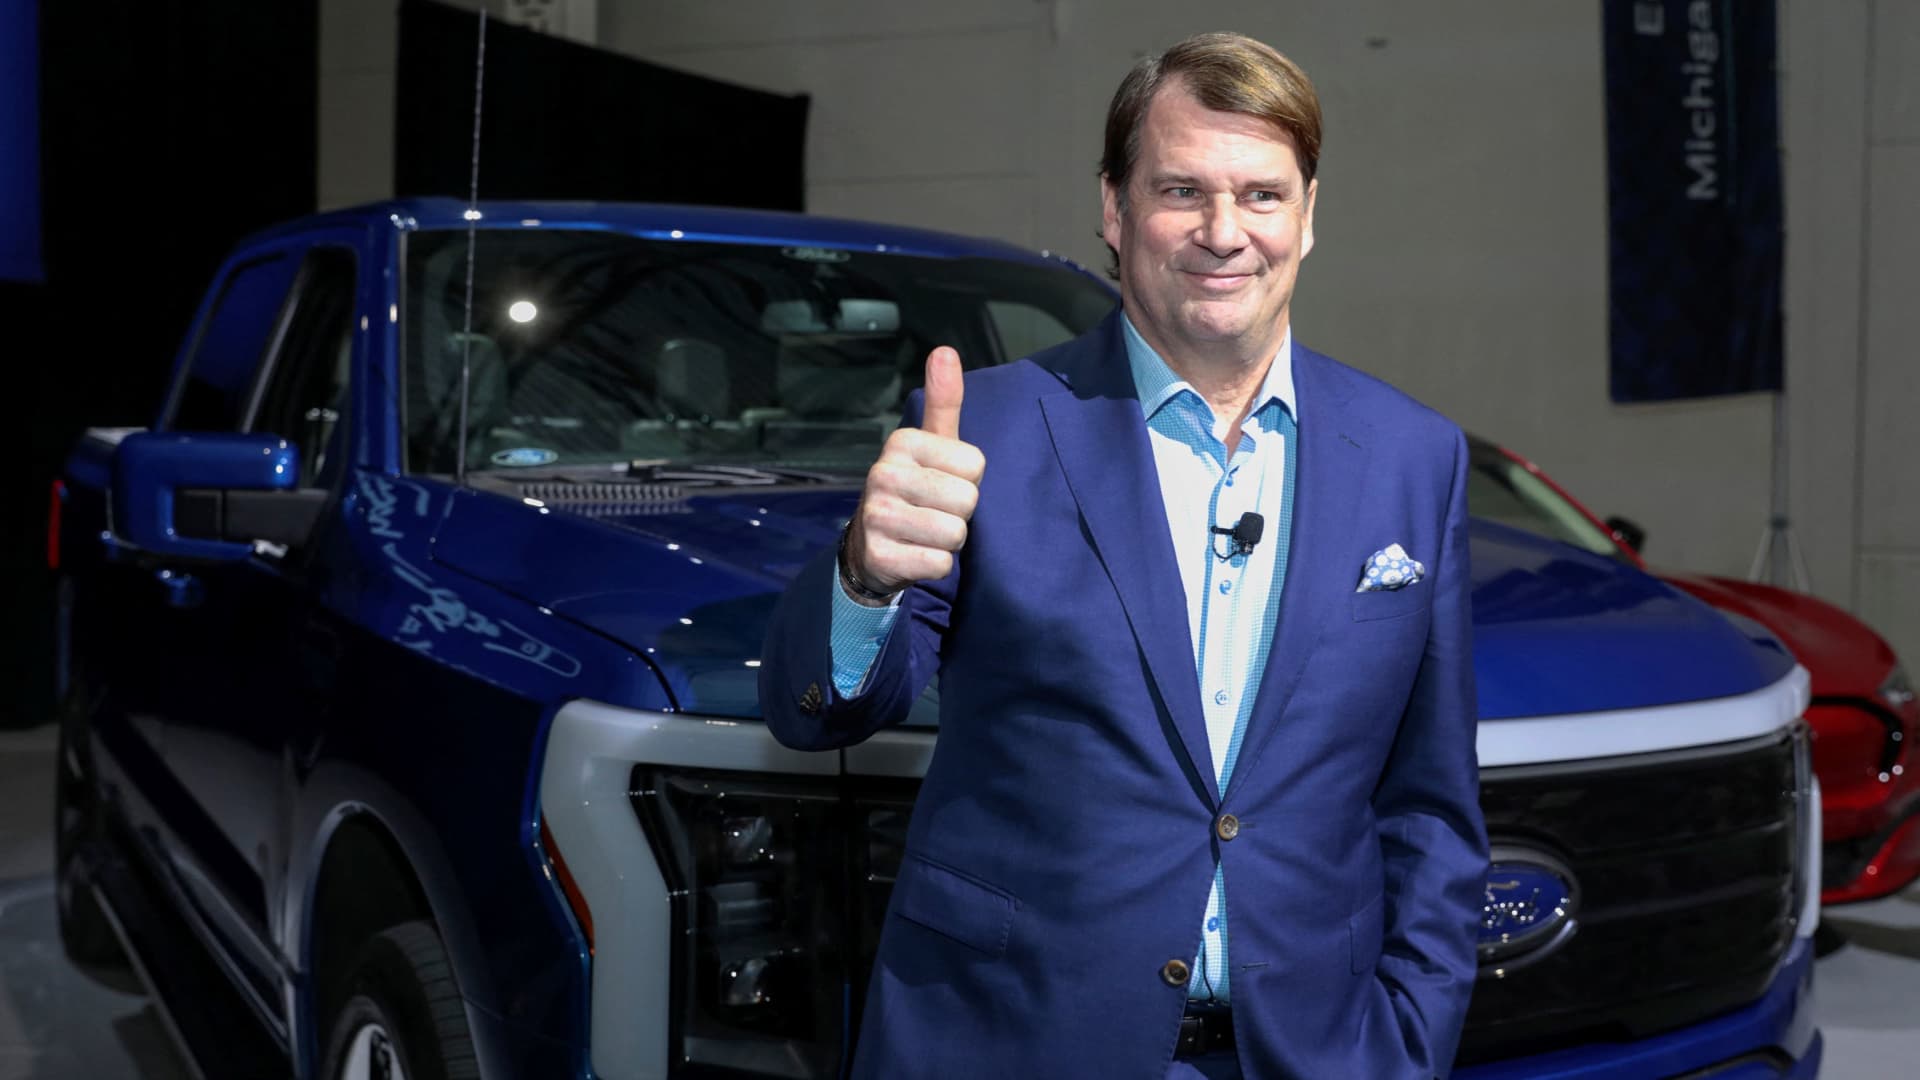 Ford CEO tells Wall Street to forget Tesla, says ‘Pro’ business is the future of the auto industry